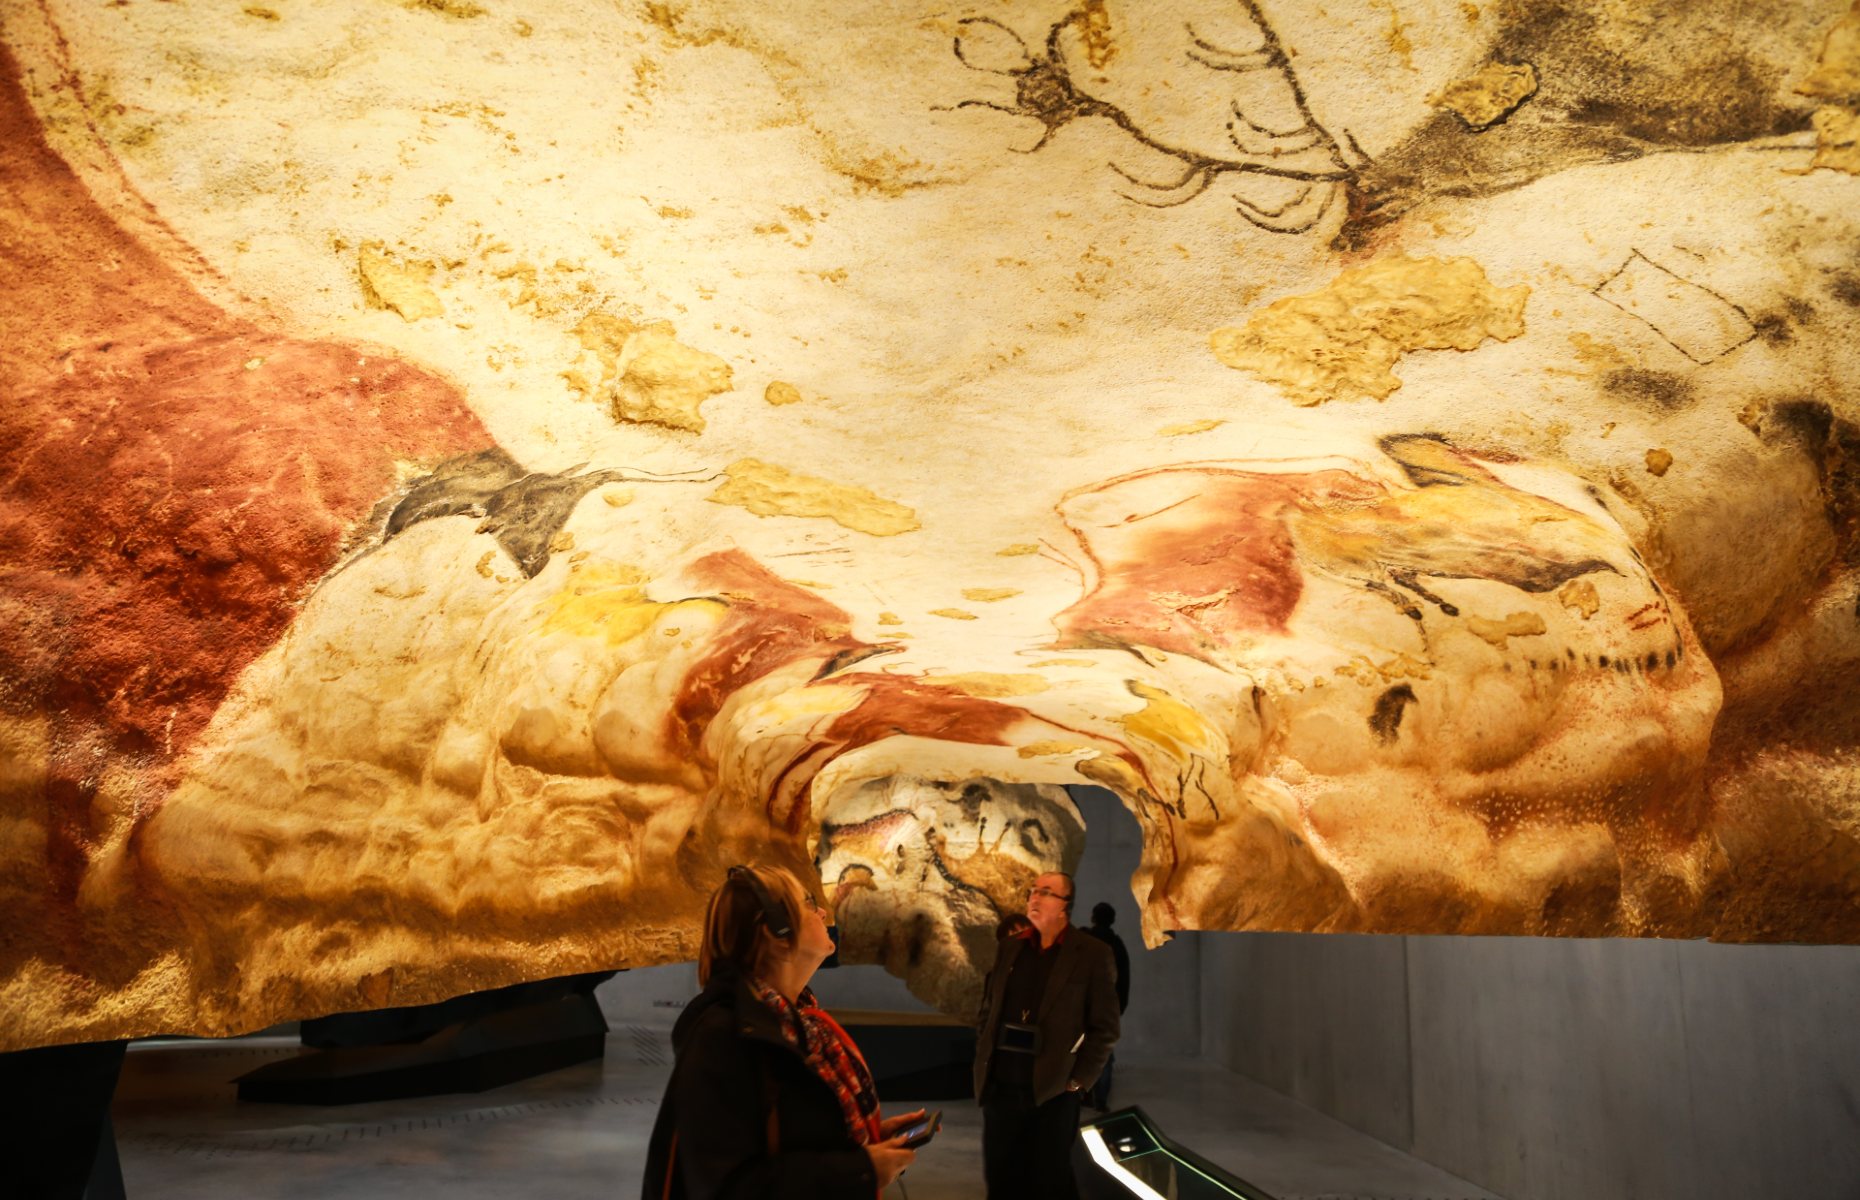 Lascaux Caves (Image: thipjang/Shutterstock)